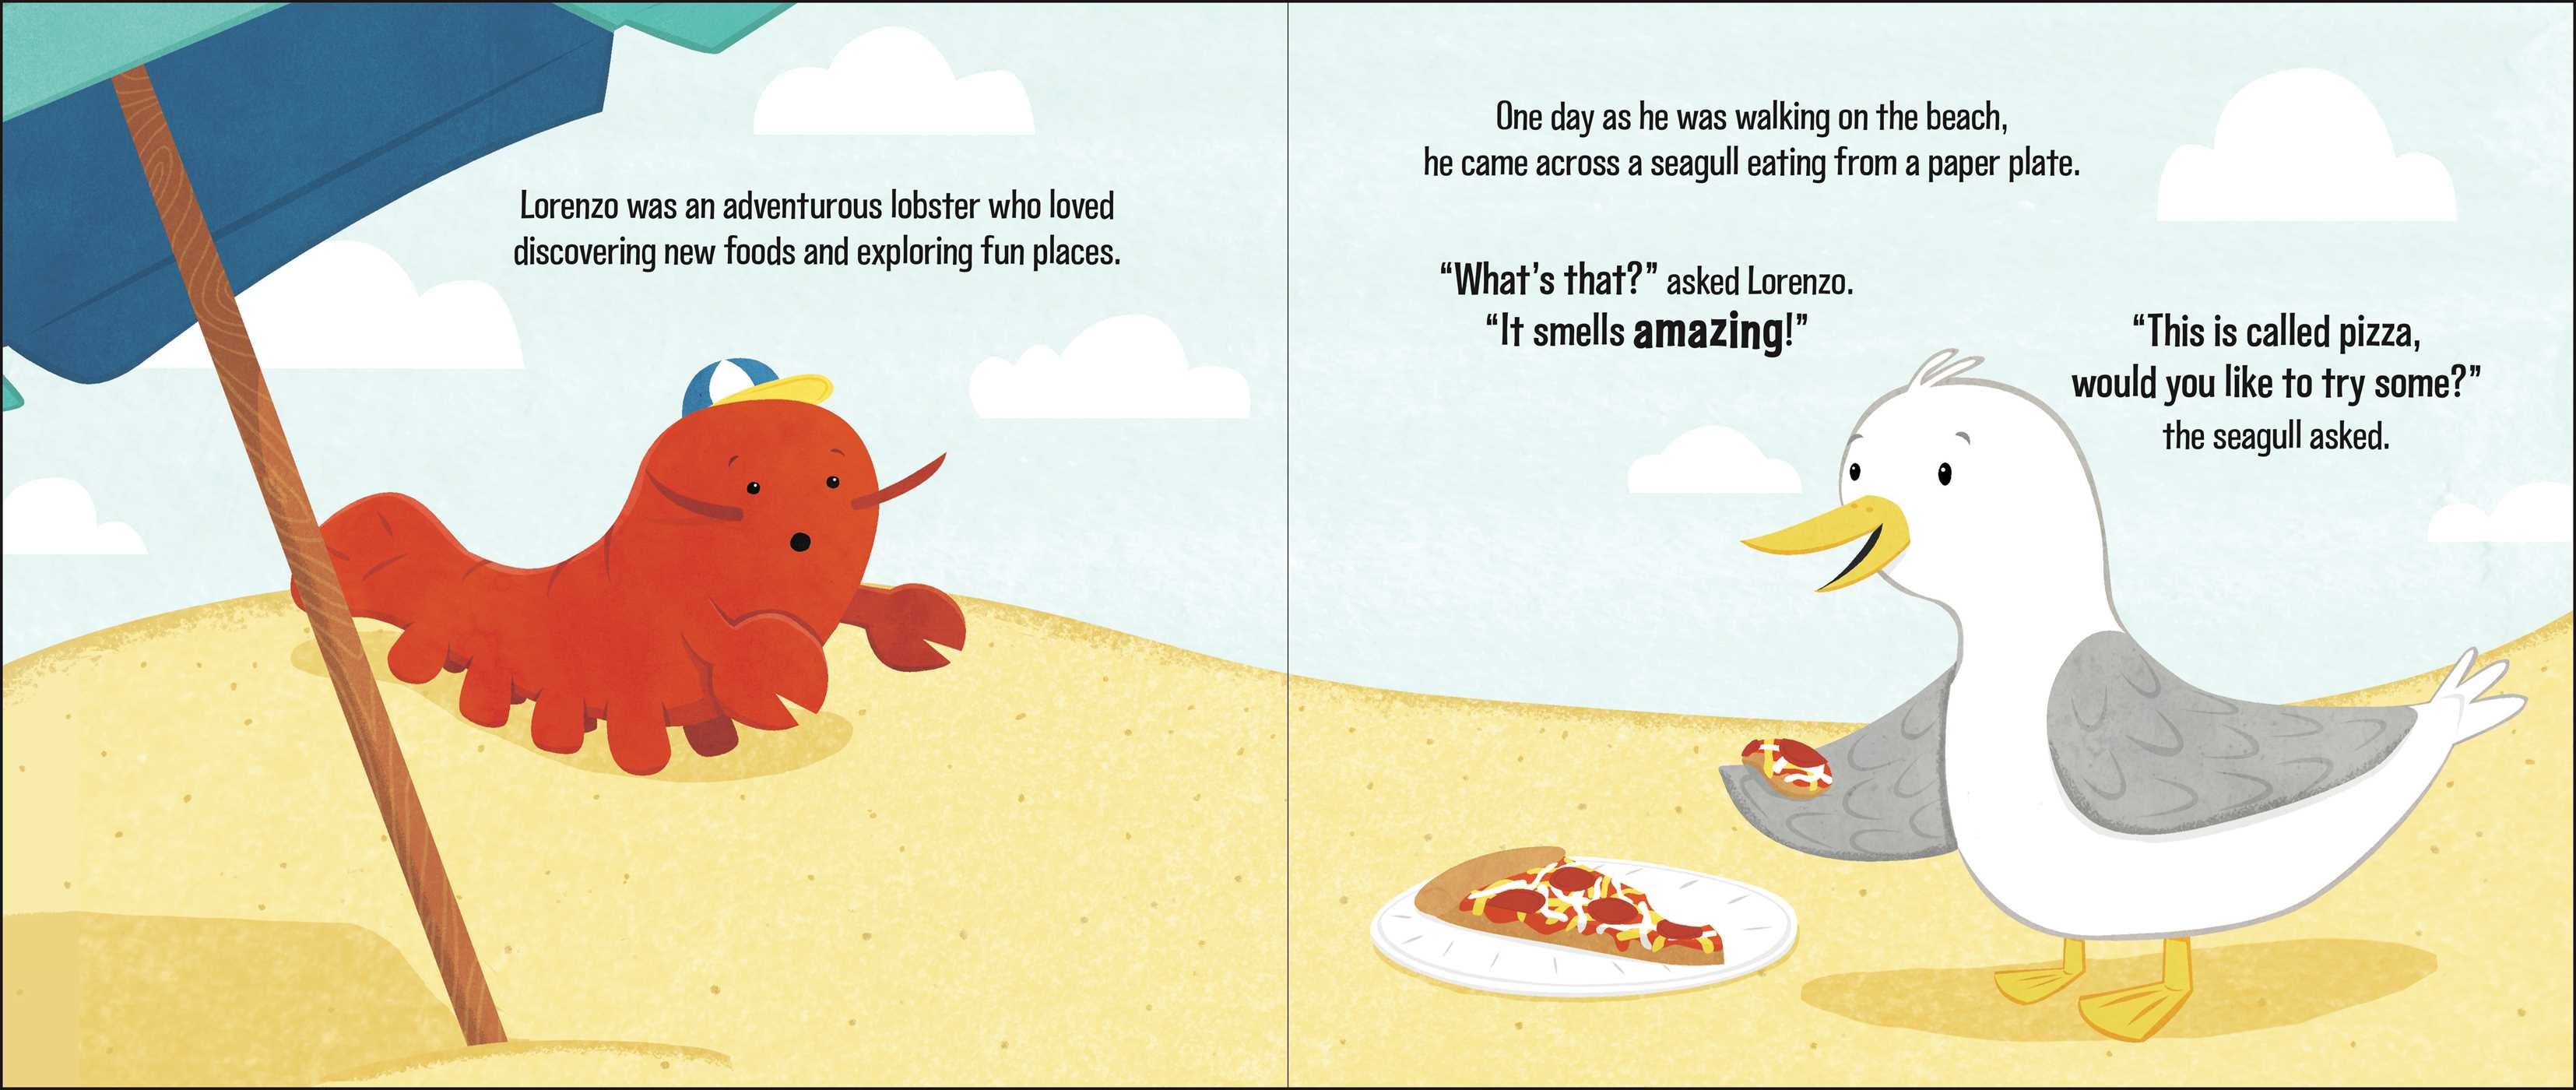 celebrate-picture-books-picture-book-review-lorenzo-the-pizza-loving-lobster-riding-introduced-to-pizza